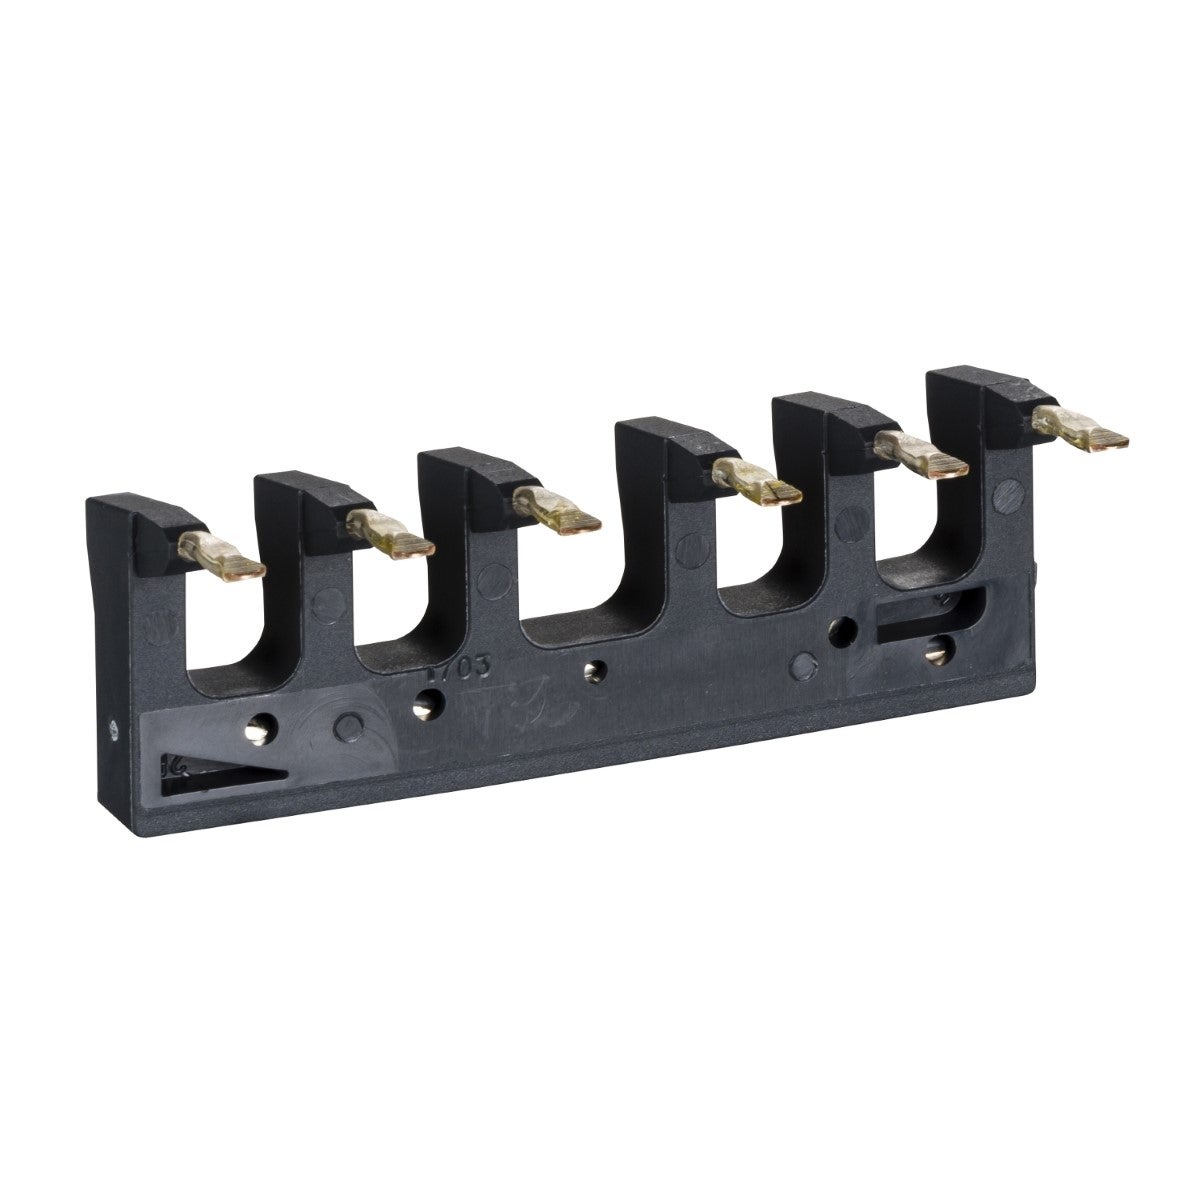 Set of power connections, inversing busbar, for 3P reversing contactors assembly, LC1D09-D38 spring terminals